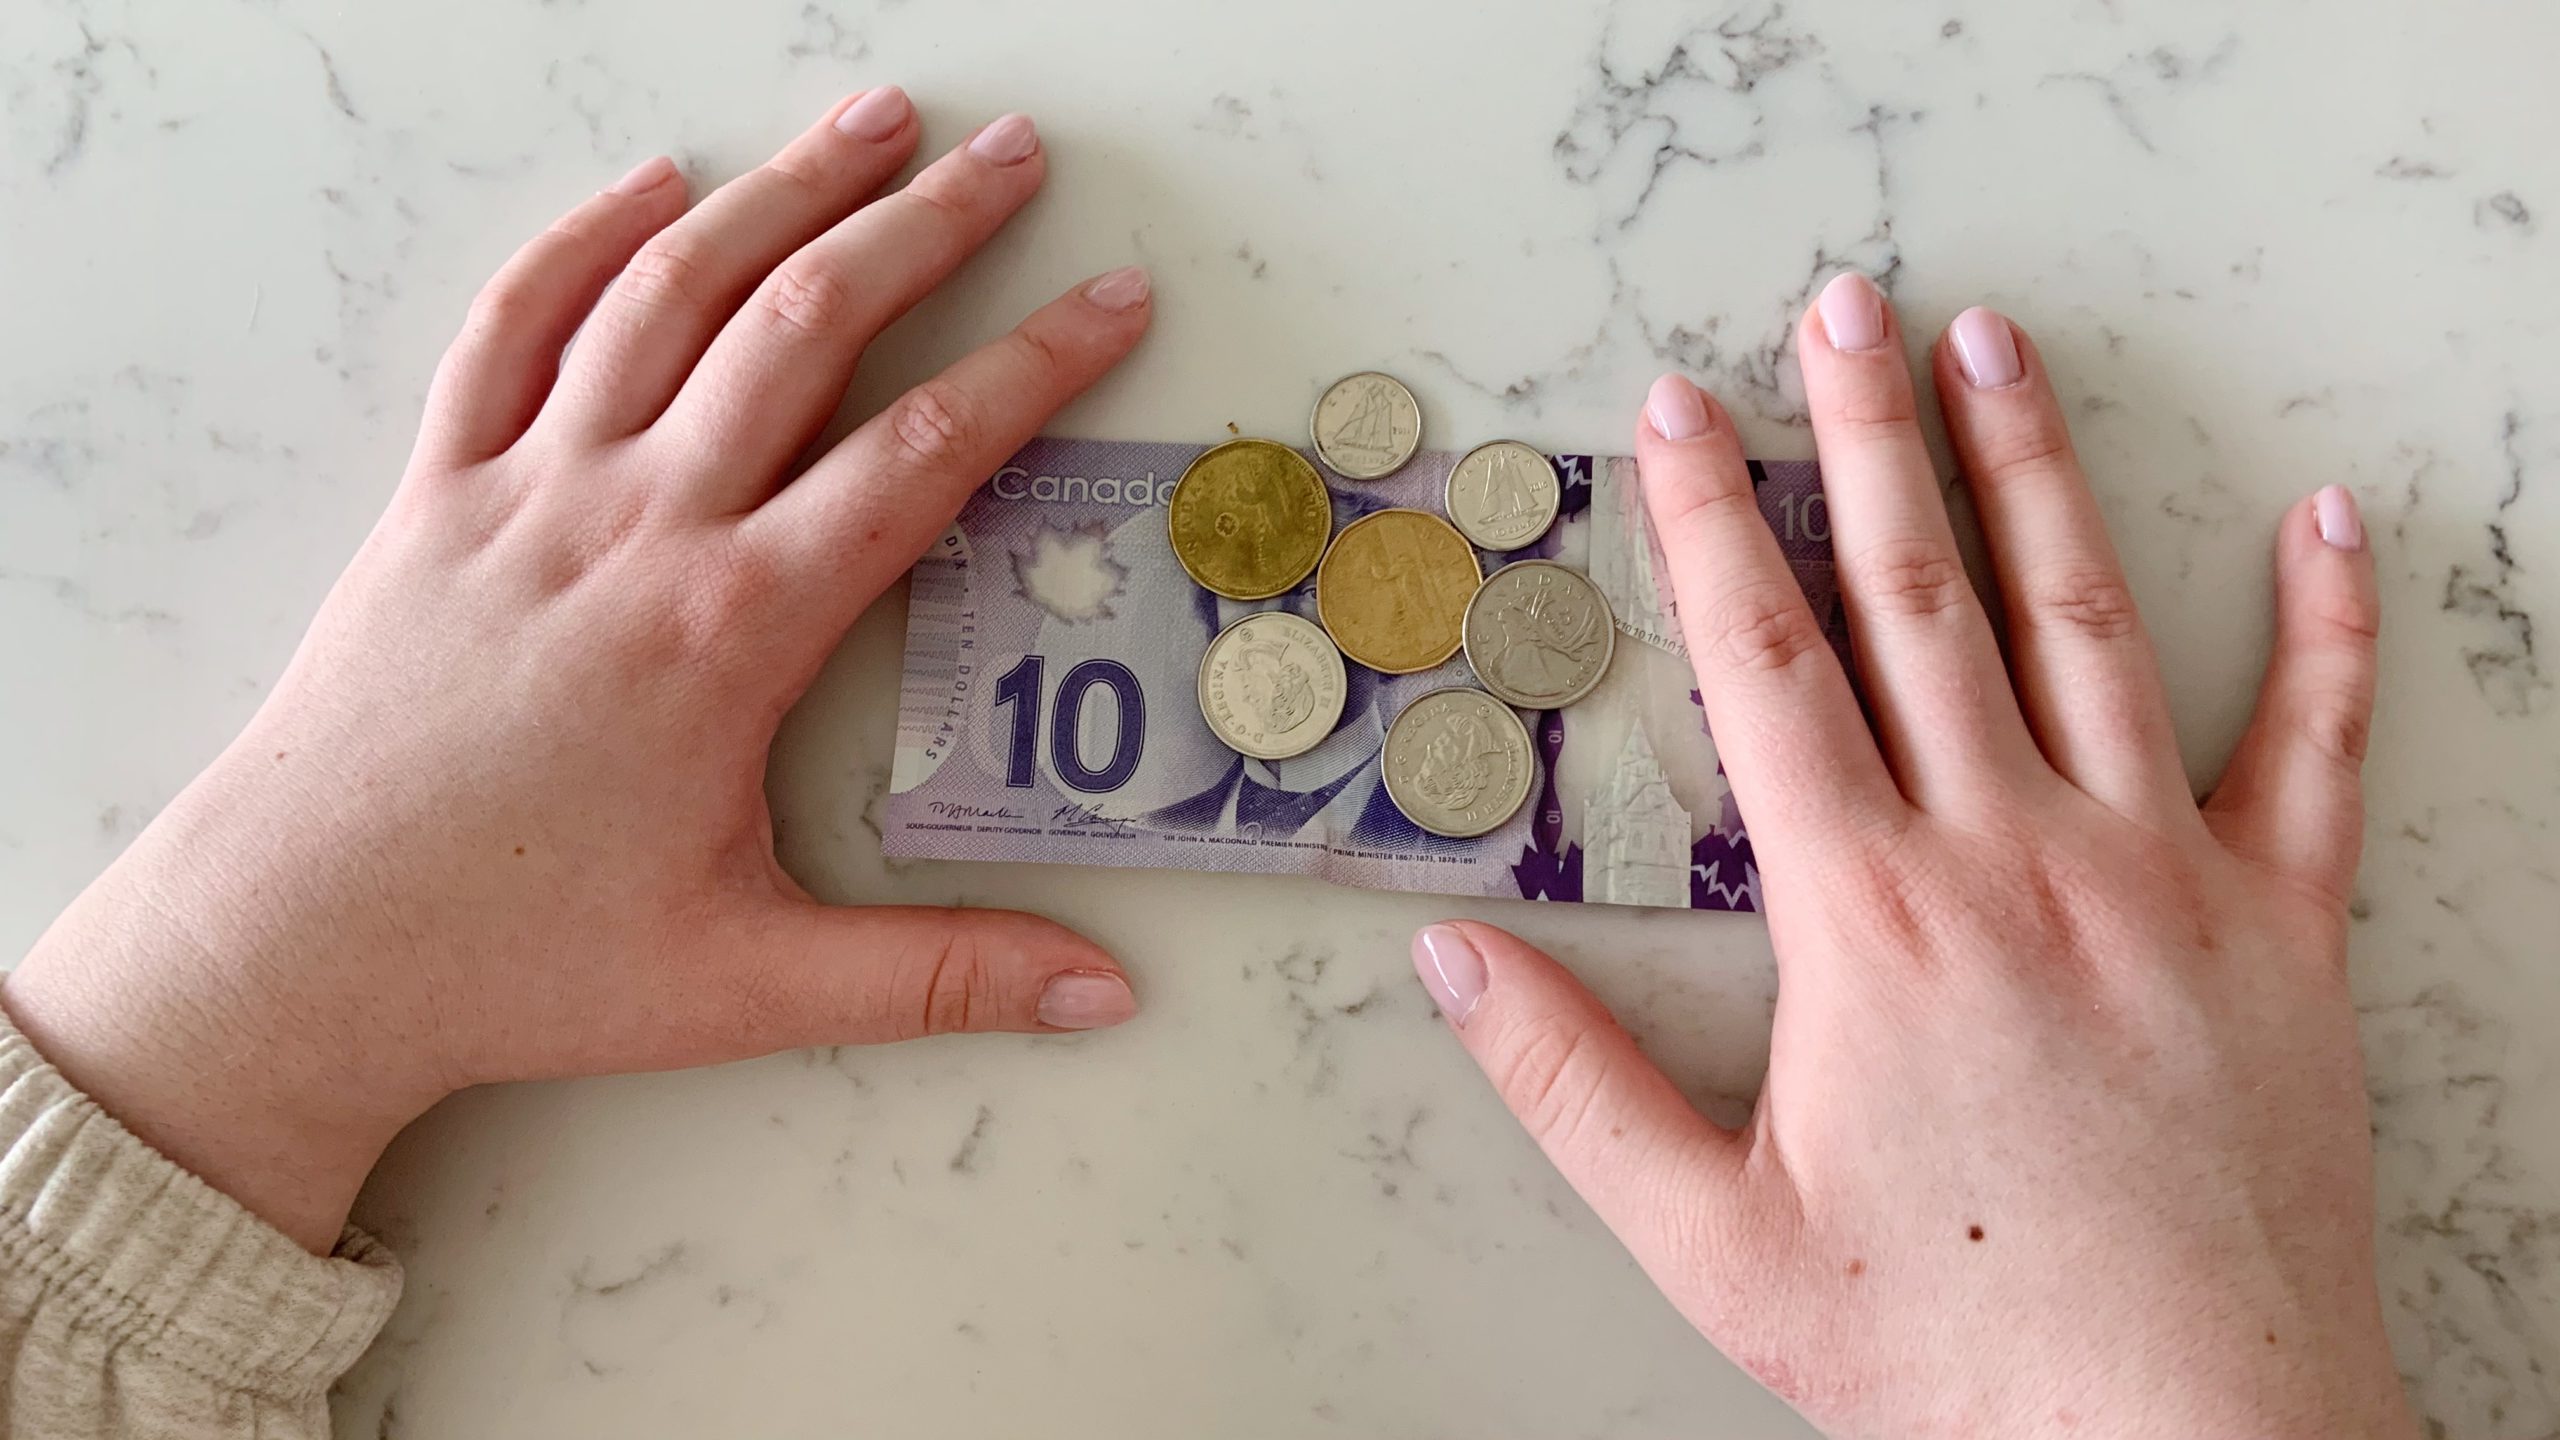 Nova Scotia’s minimum wage will increase from $12.55 to $12.95 on April 1.
